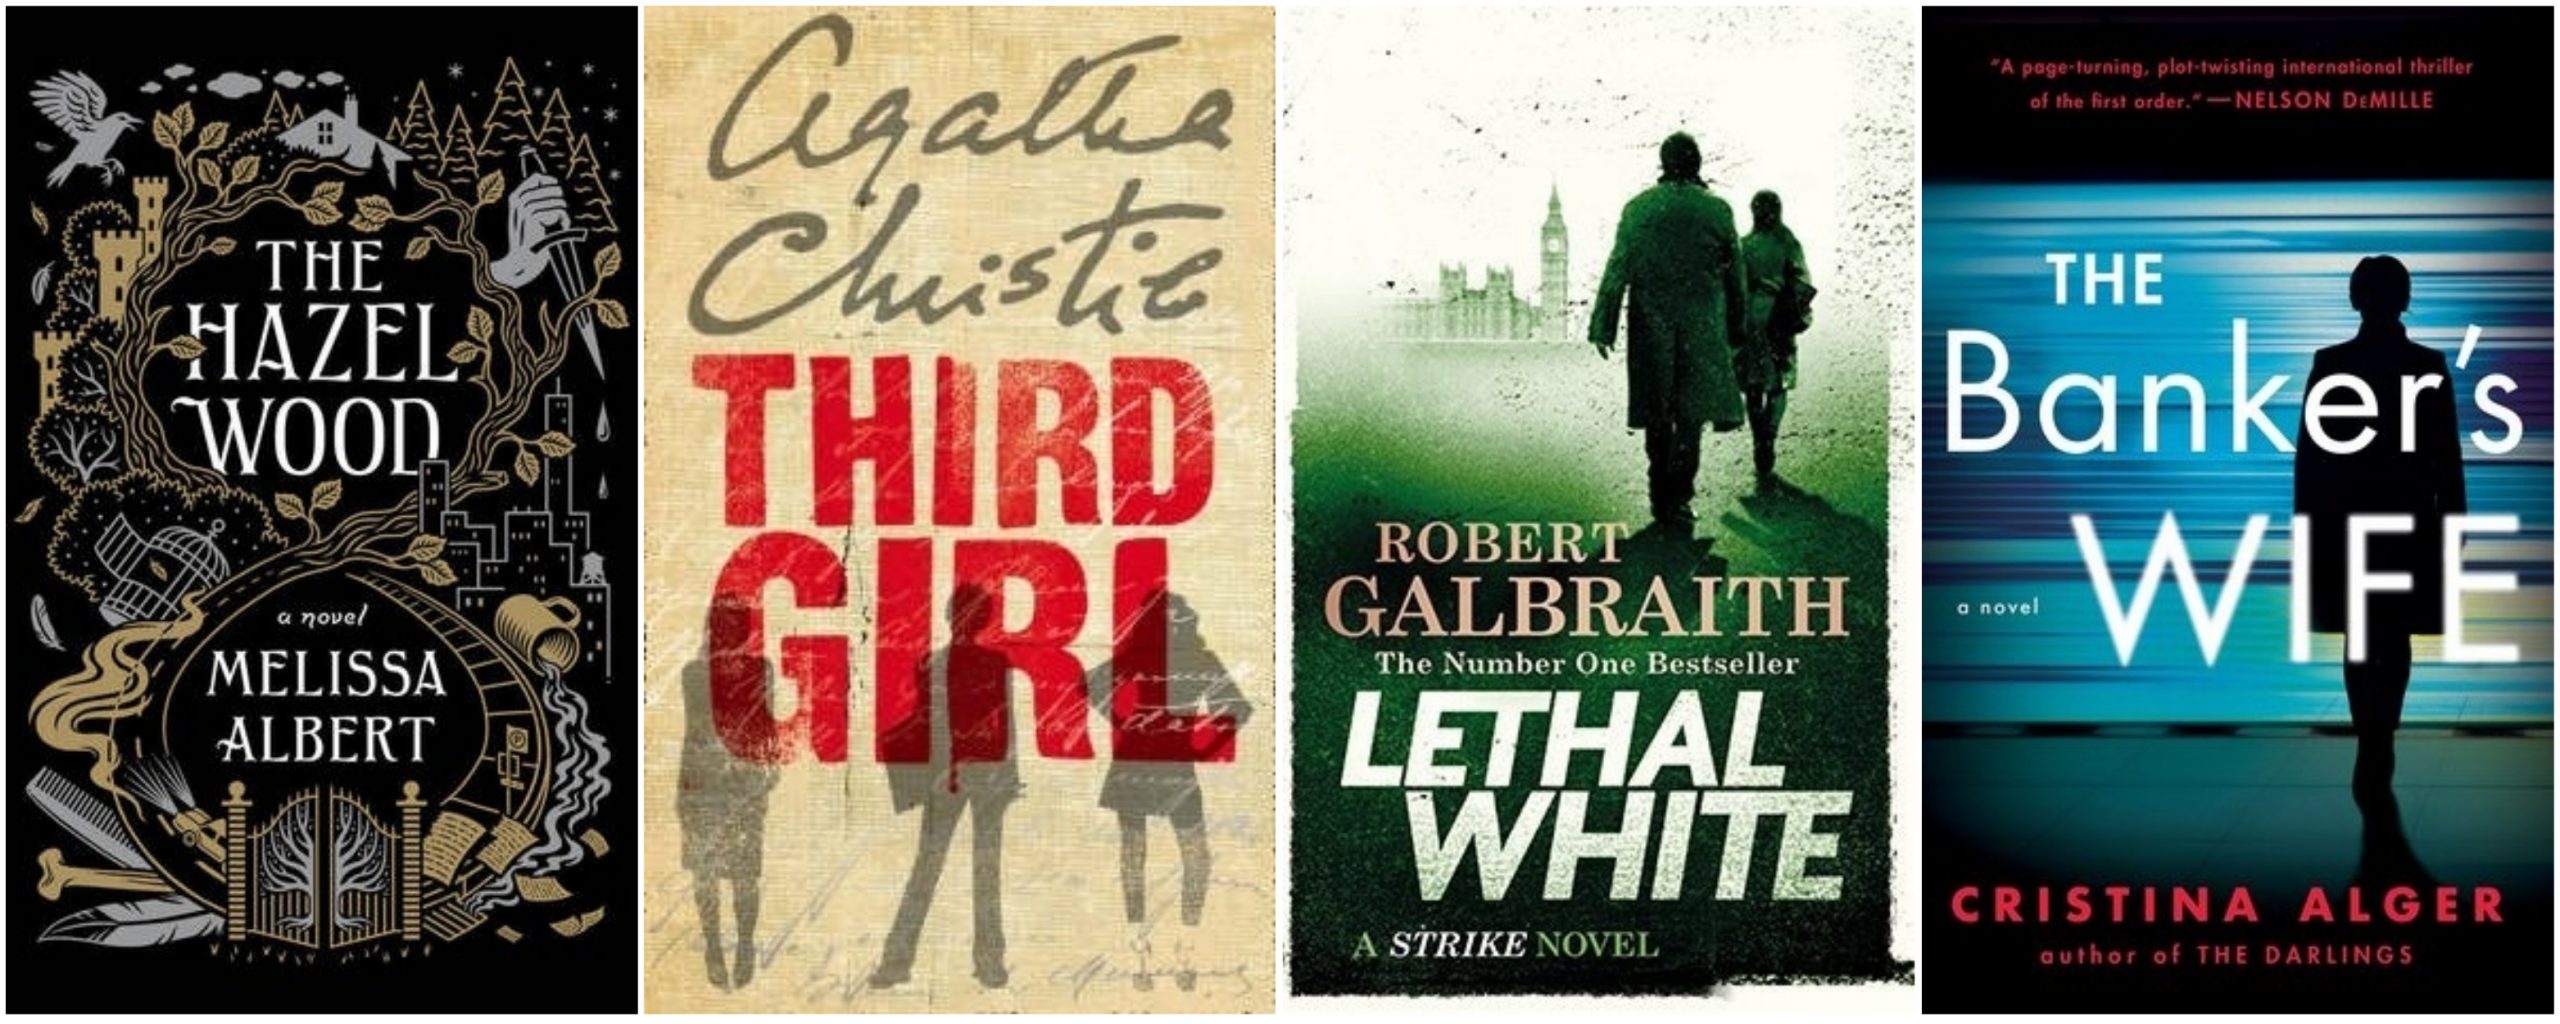 the hazel wood review, third girl review, lethal white review, the banker's wife review